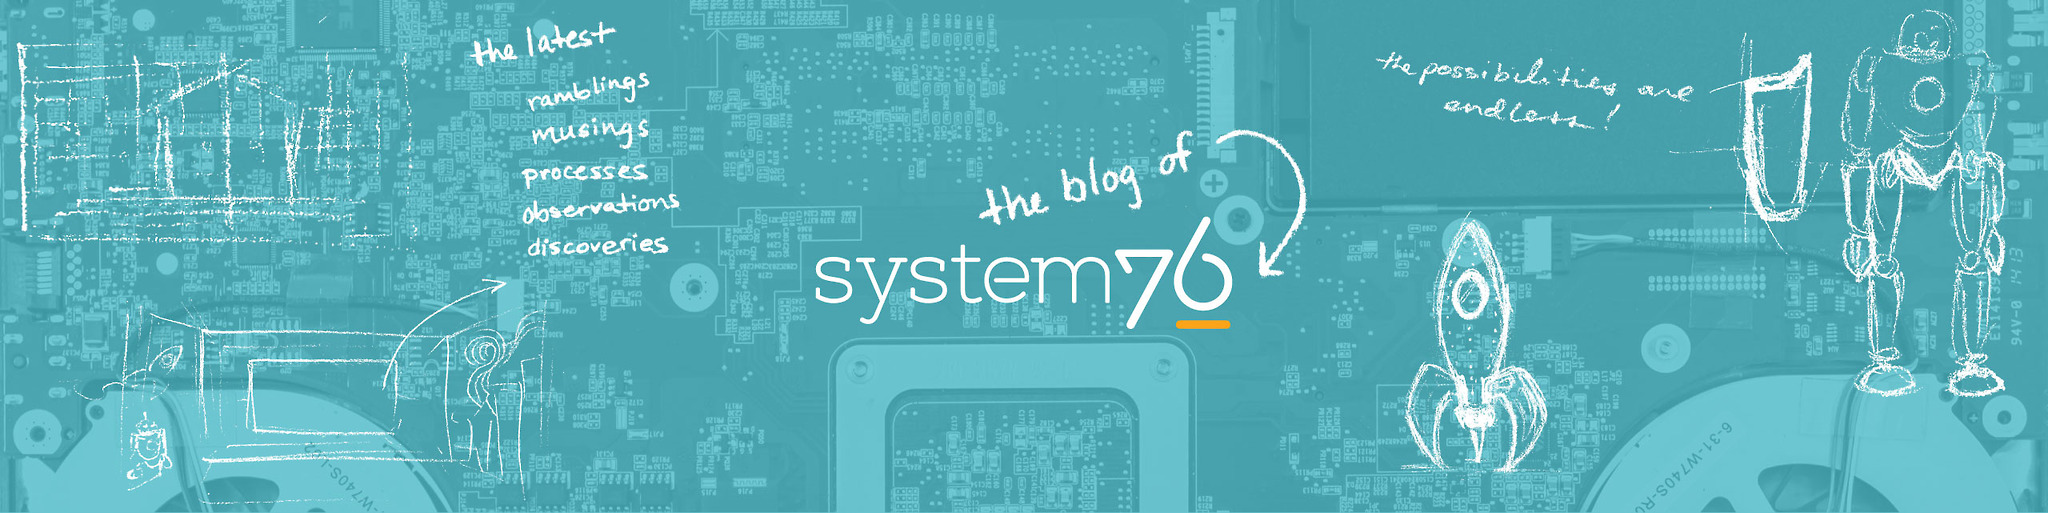 System76 Blog RSS Feed